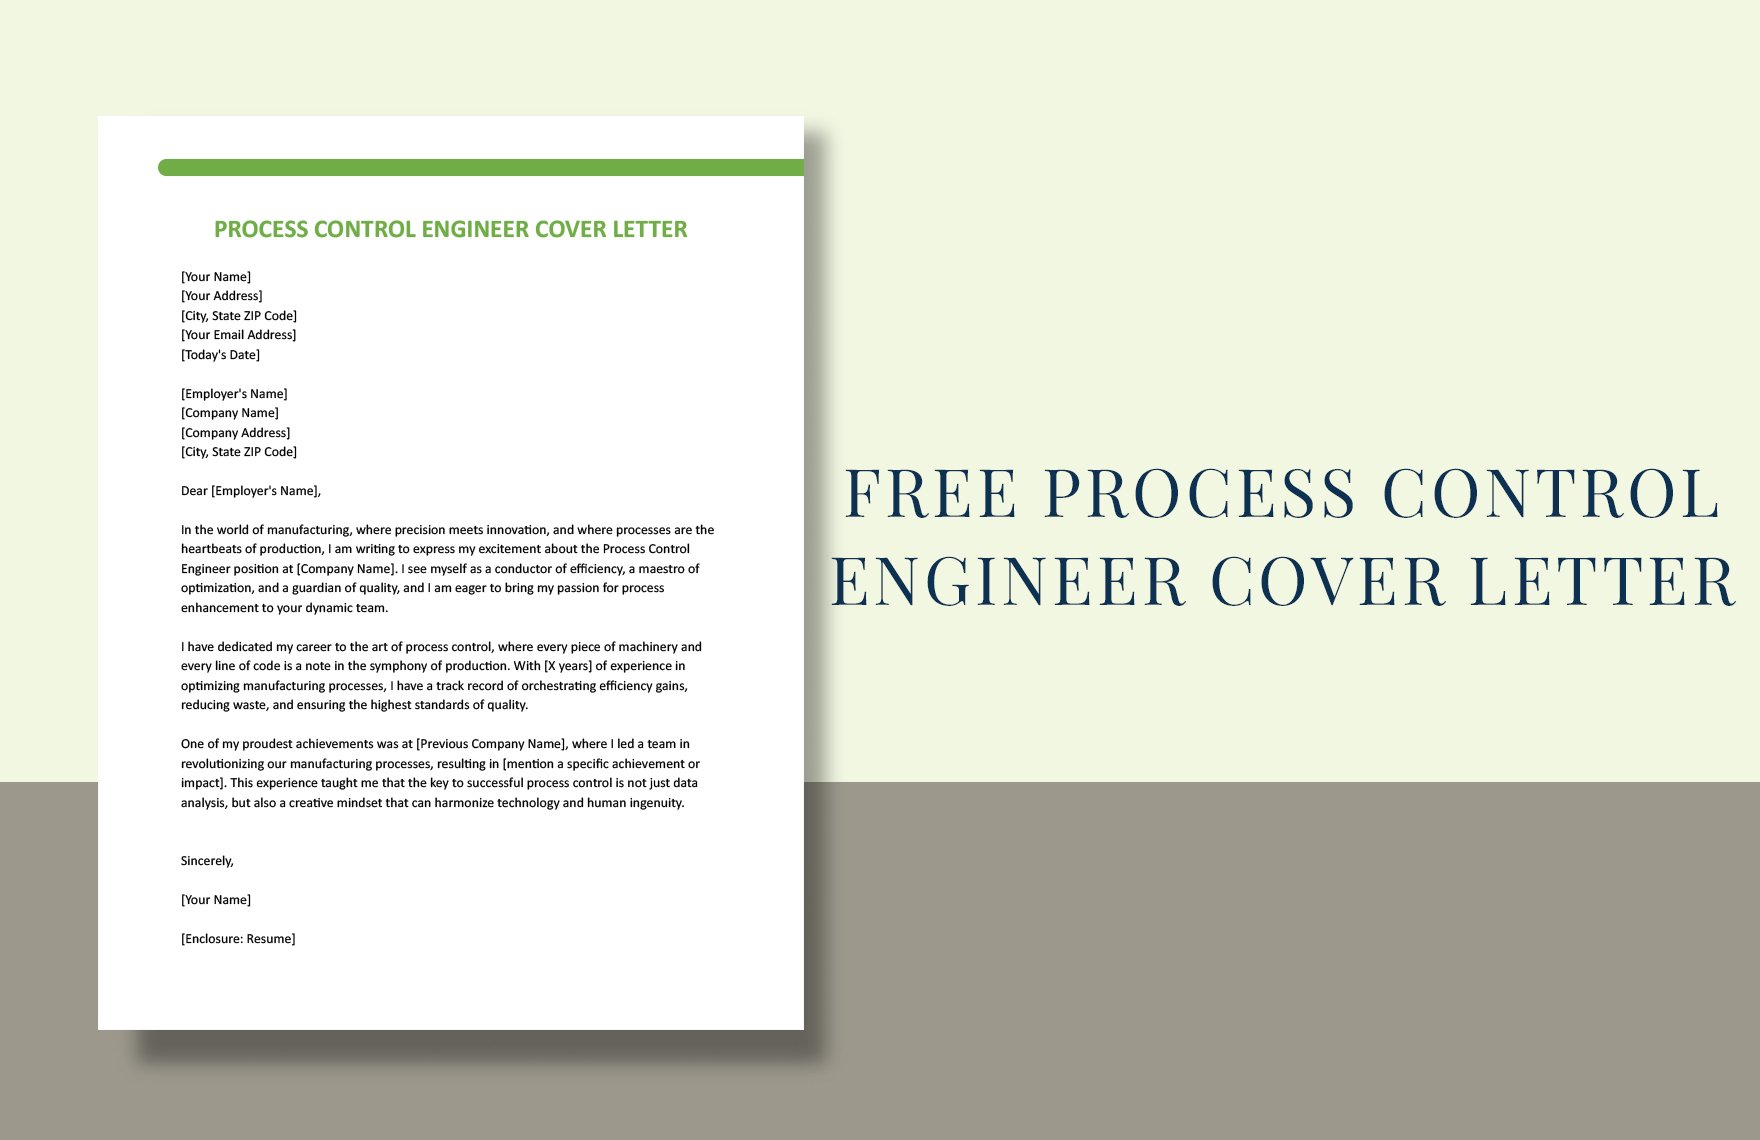 Process Control Engineer Cover Letter in Word, Google Docs